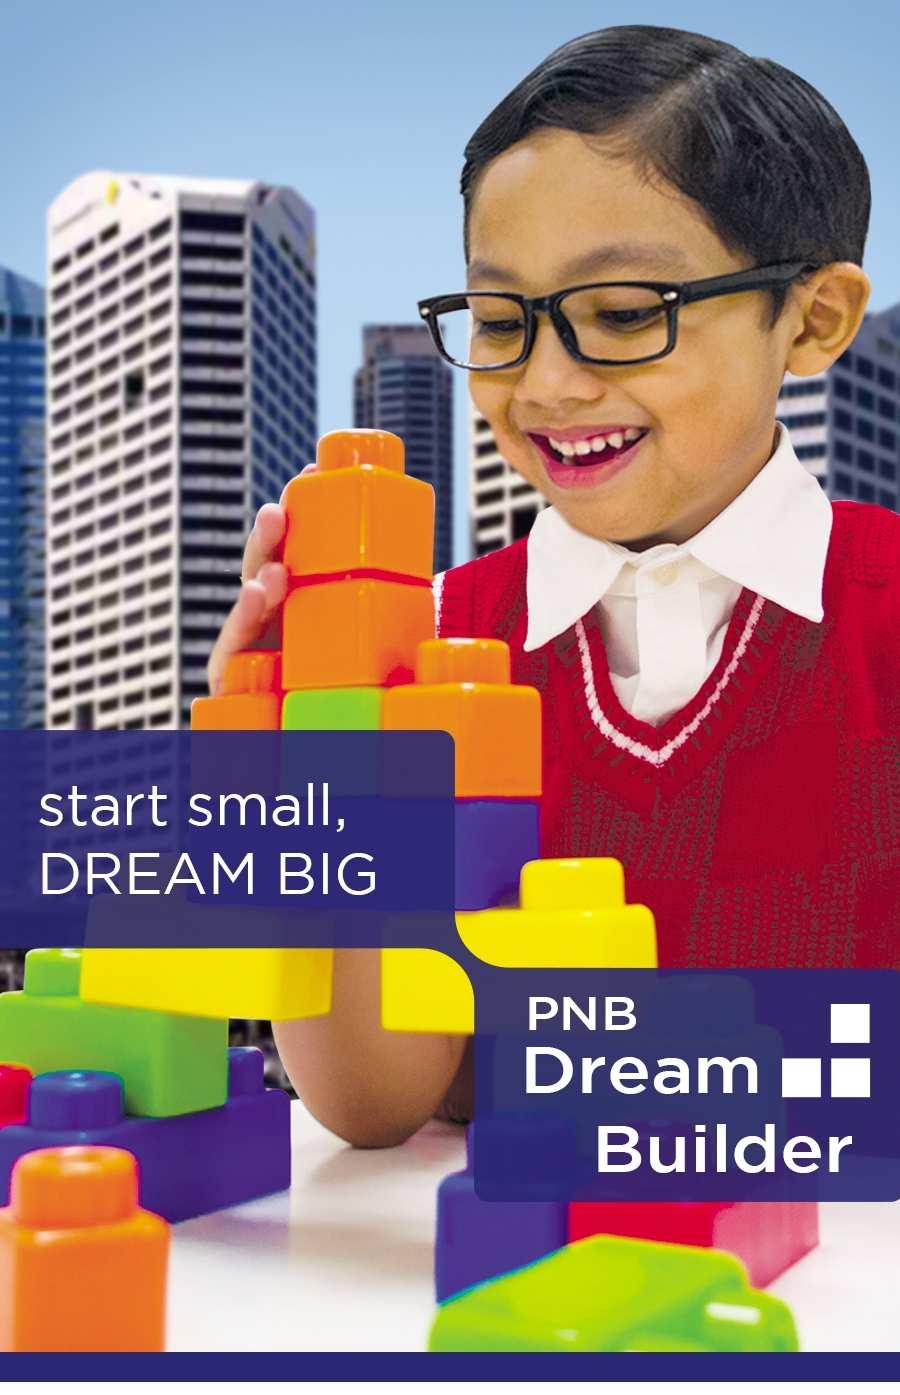 PNB DREAM Builder Money Market Fund MONEY MAET This fund is suited for conservative clients who wants an investment strategy where the primary objective is to prevent the loss of principal at all